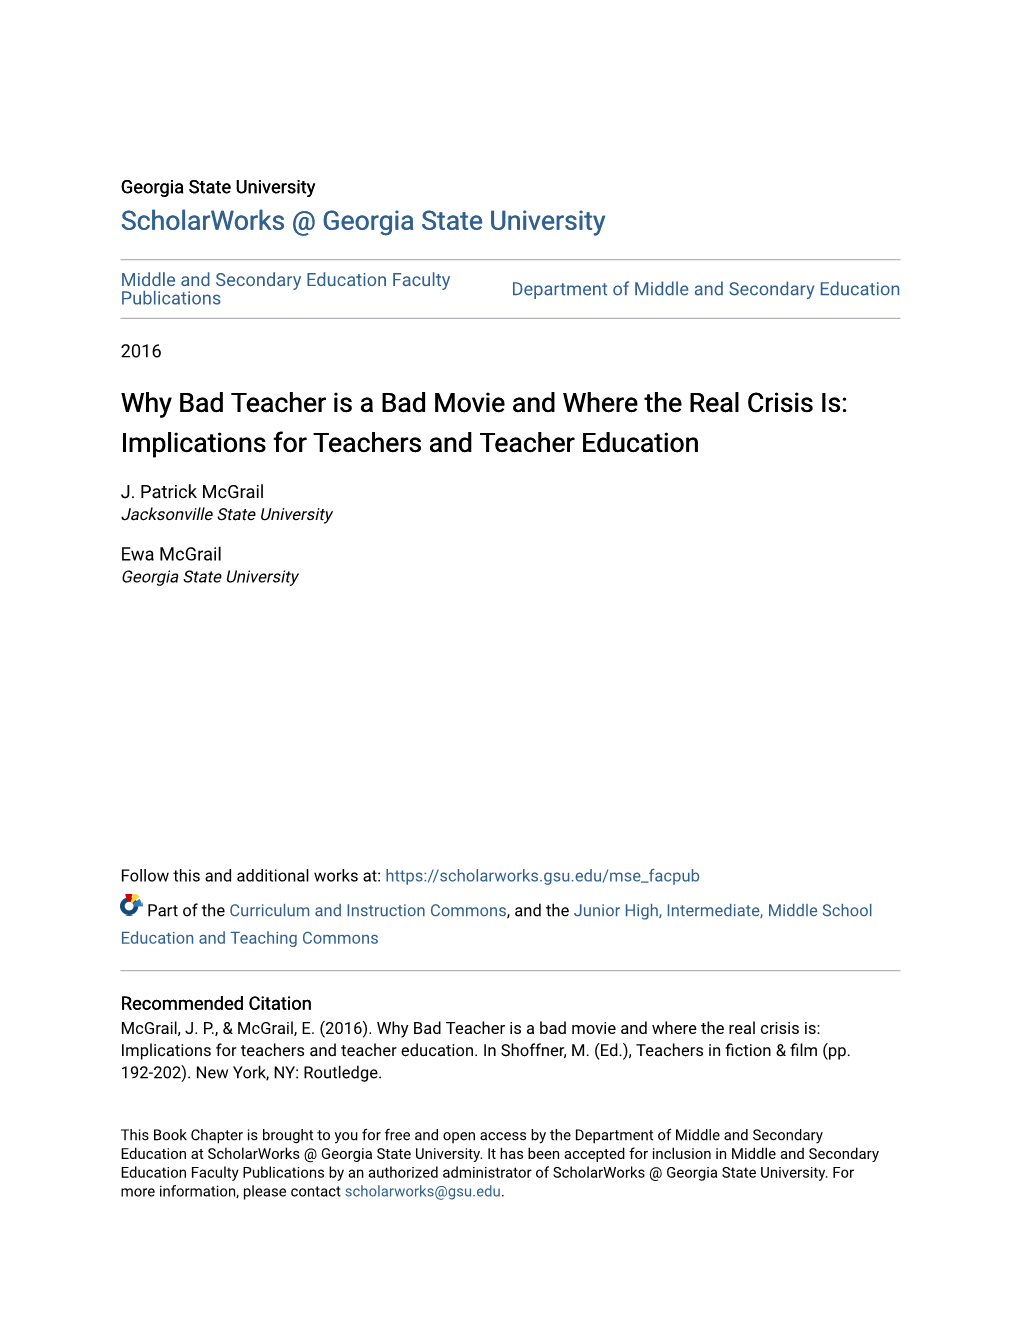 Why Bad Teacher Is a Bad Movie and Where the Real Crisis Is: Implications for Teachers and Teacher Education